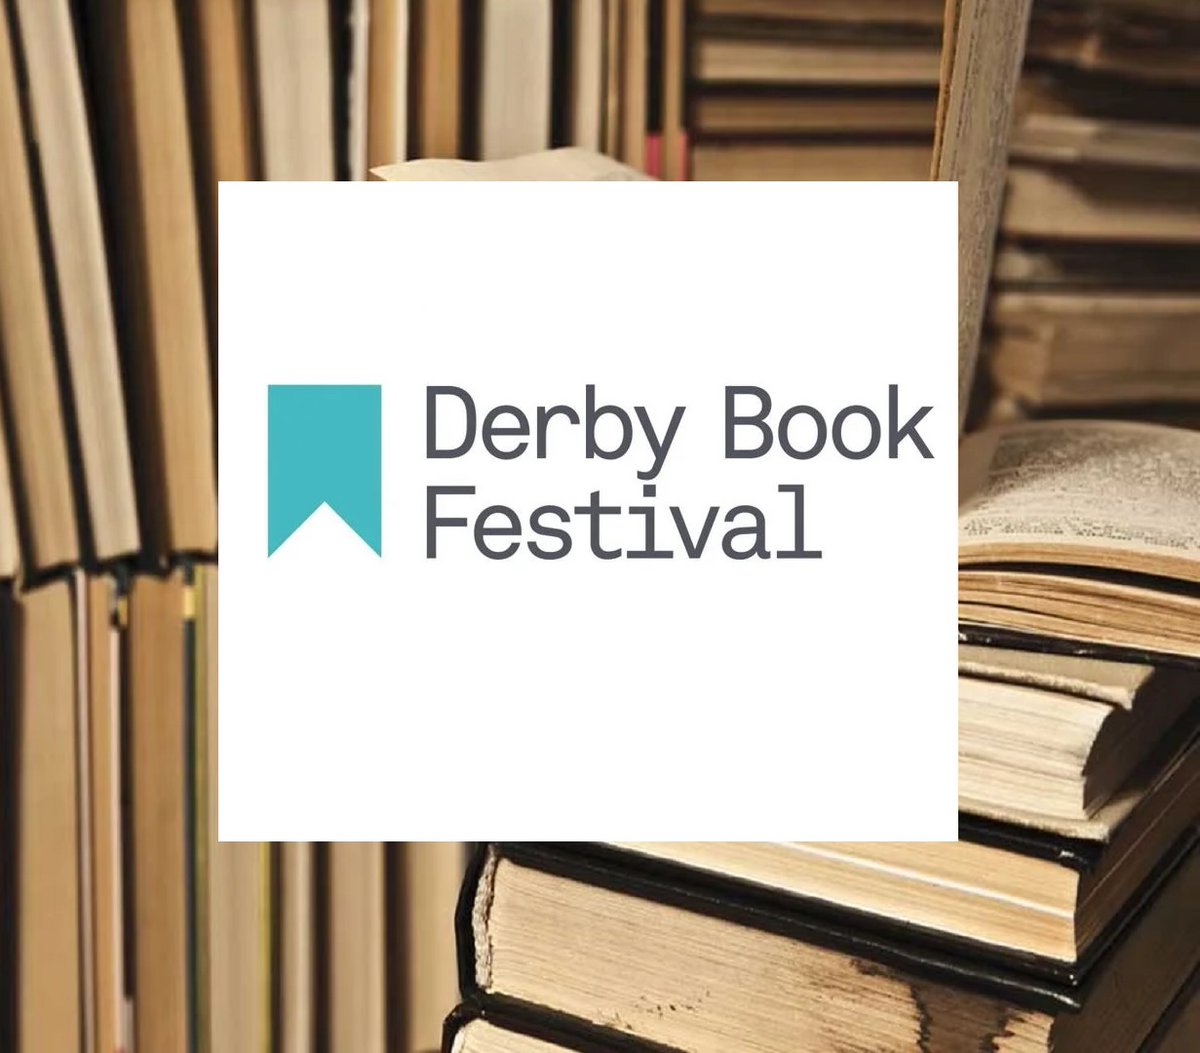 📚🌞The Summer @DerbyBookFest begins today! 
📍 Derby locations
📆 30 May - 5 June
From captivating author talks to engaging workshops and family-friendly events, there's something for every book lover. Discover more about the festival ⬇
shorturl.at/mWx6x
#DerbyUK